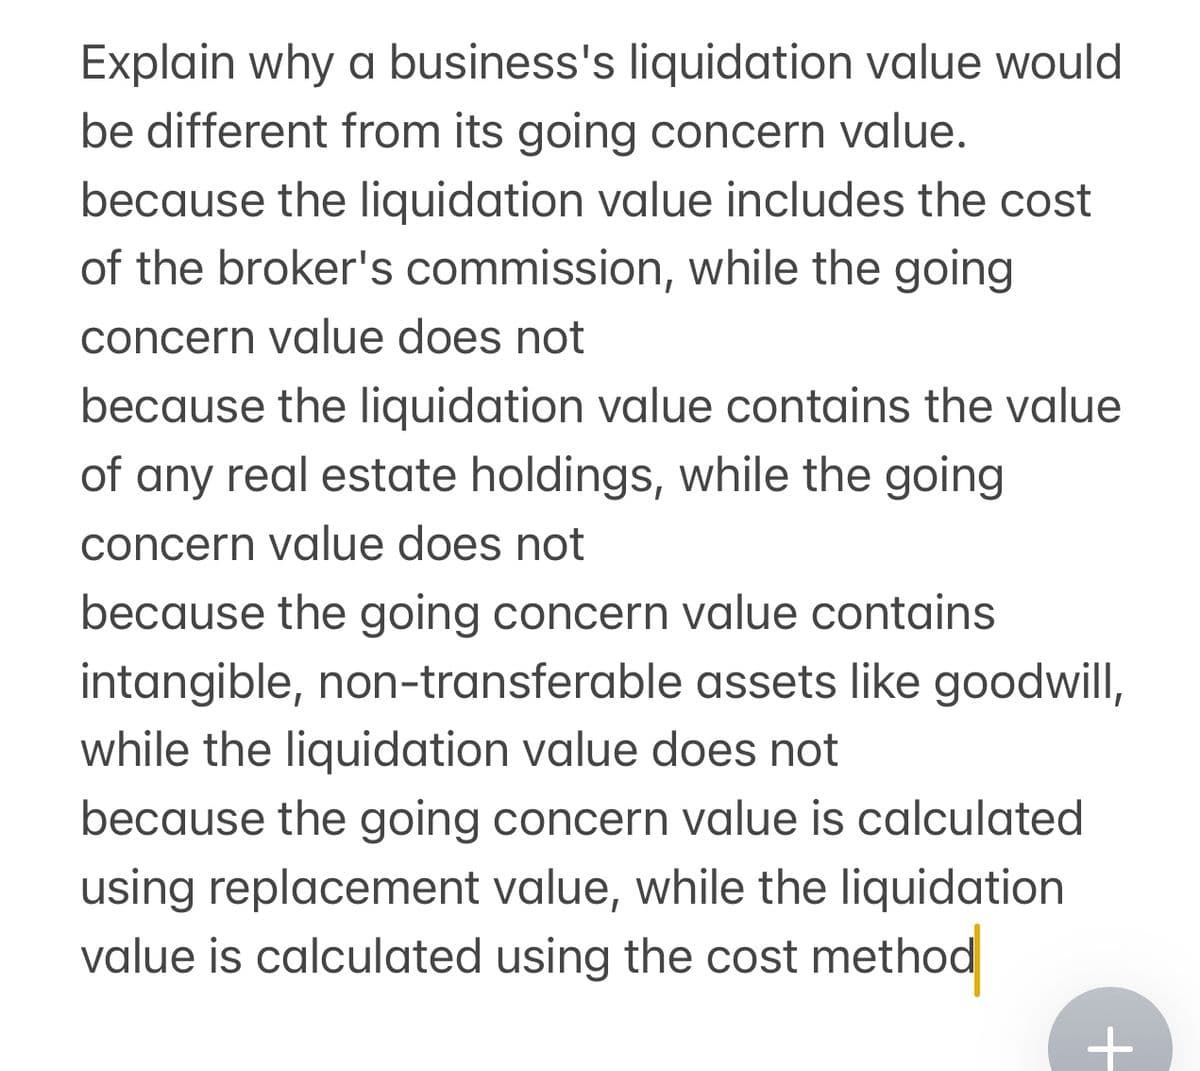 Explain why a business's liquidation value would
be different from its going concern value.
because the liquidation value includes the cost
of the broker's commission, while the going
concern value does not
because the liquidation value contains the value
of any real estate holdings, while the going
concern value does not
because the going concern value contains
intangible, non-transferable assets like goodwill,
while the liquidation value does not
because the going concern value is calculated
using replacement value, while the liquidation
value is calculated using the cost method
+